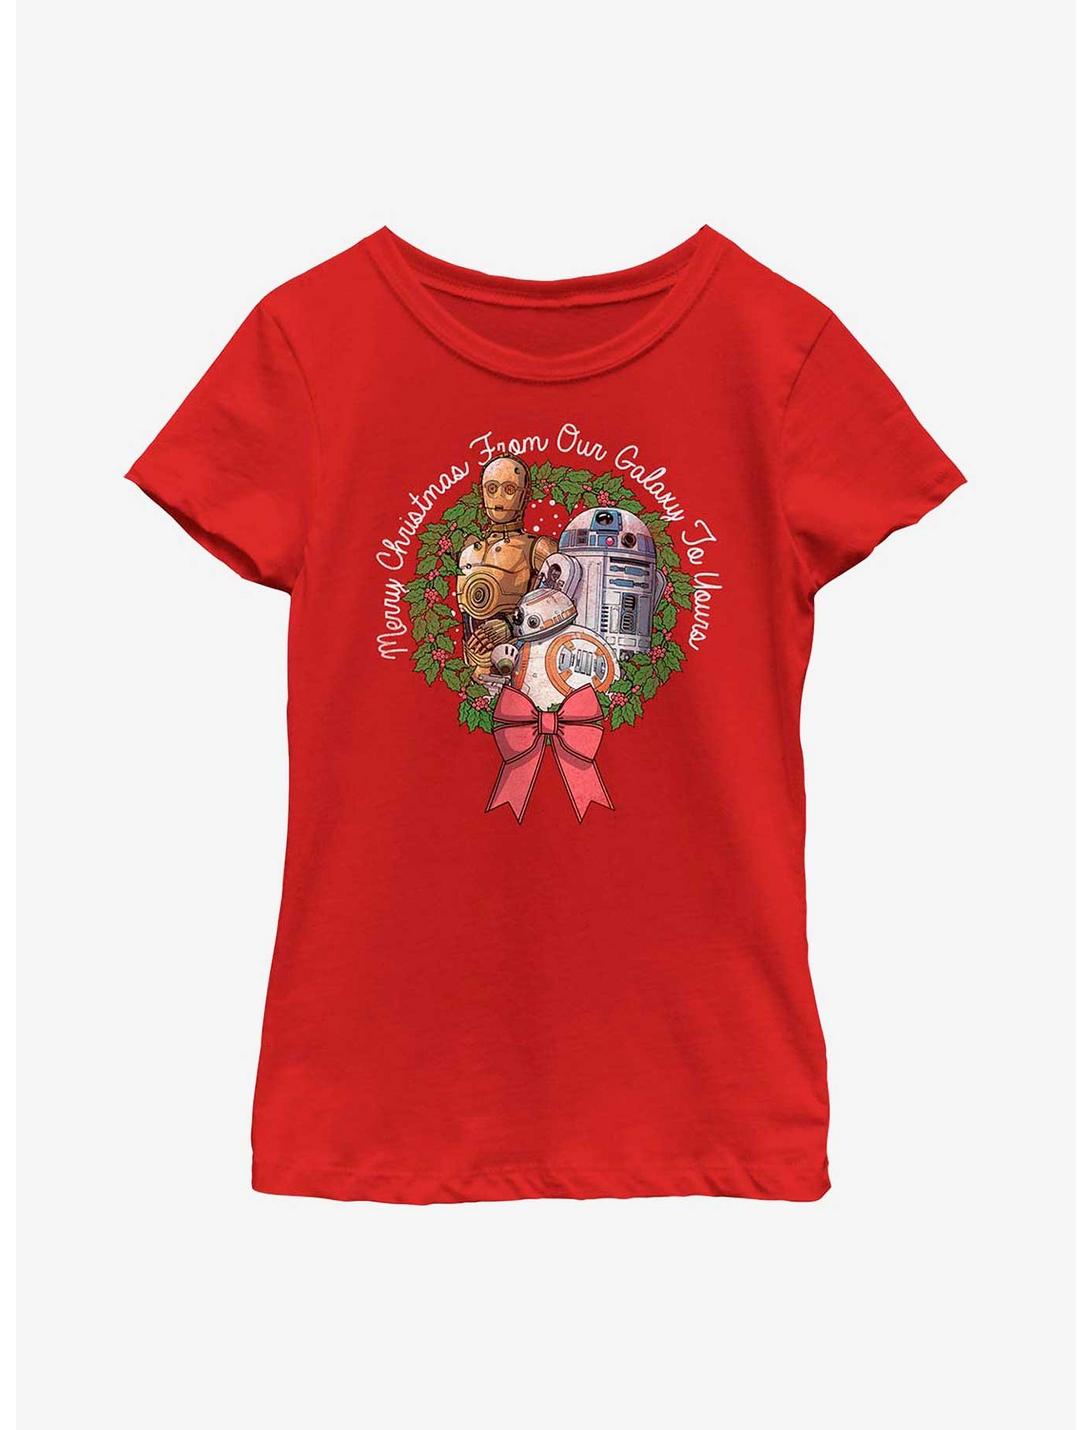 Star Wars From Our Galaxy To Yours Youth Girls T-Shirt, RED, hi-res